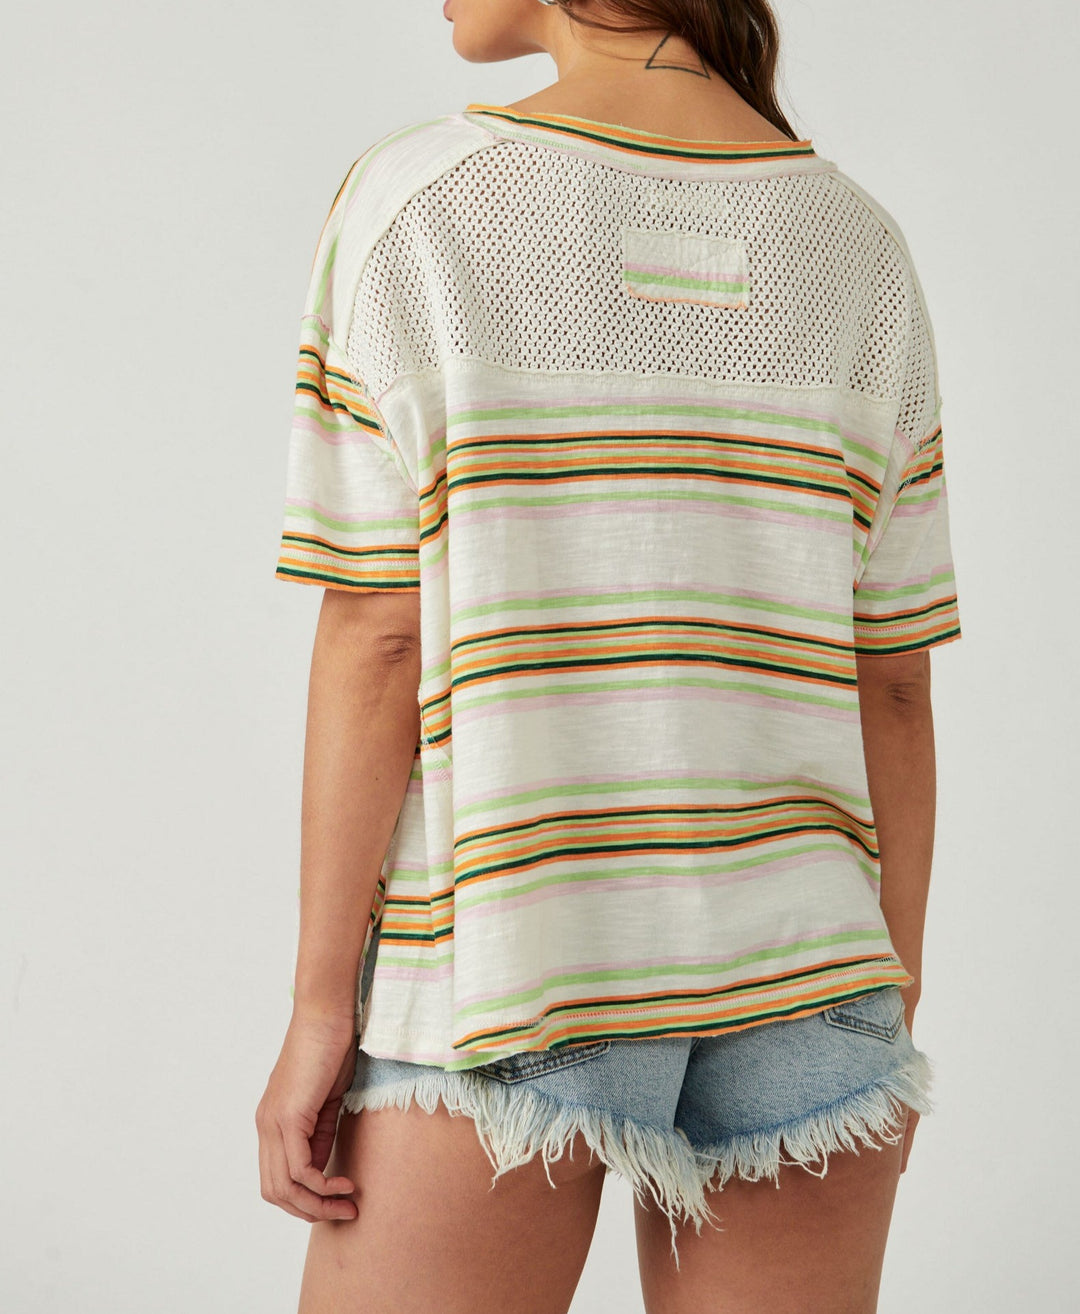 BEACH DREAMIN TEE - IVORY COMBO - Kingfisher Road - Online Boutique